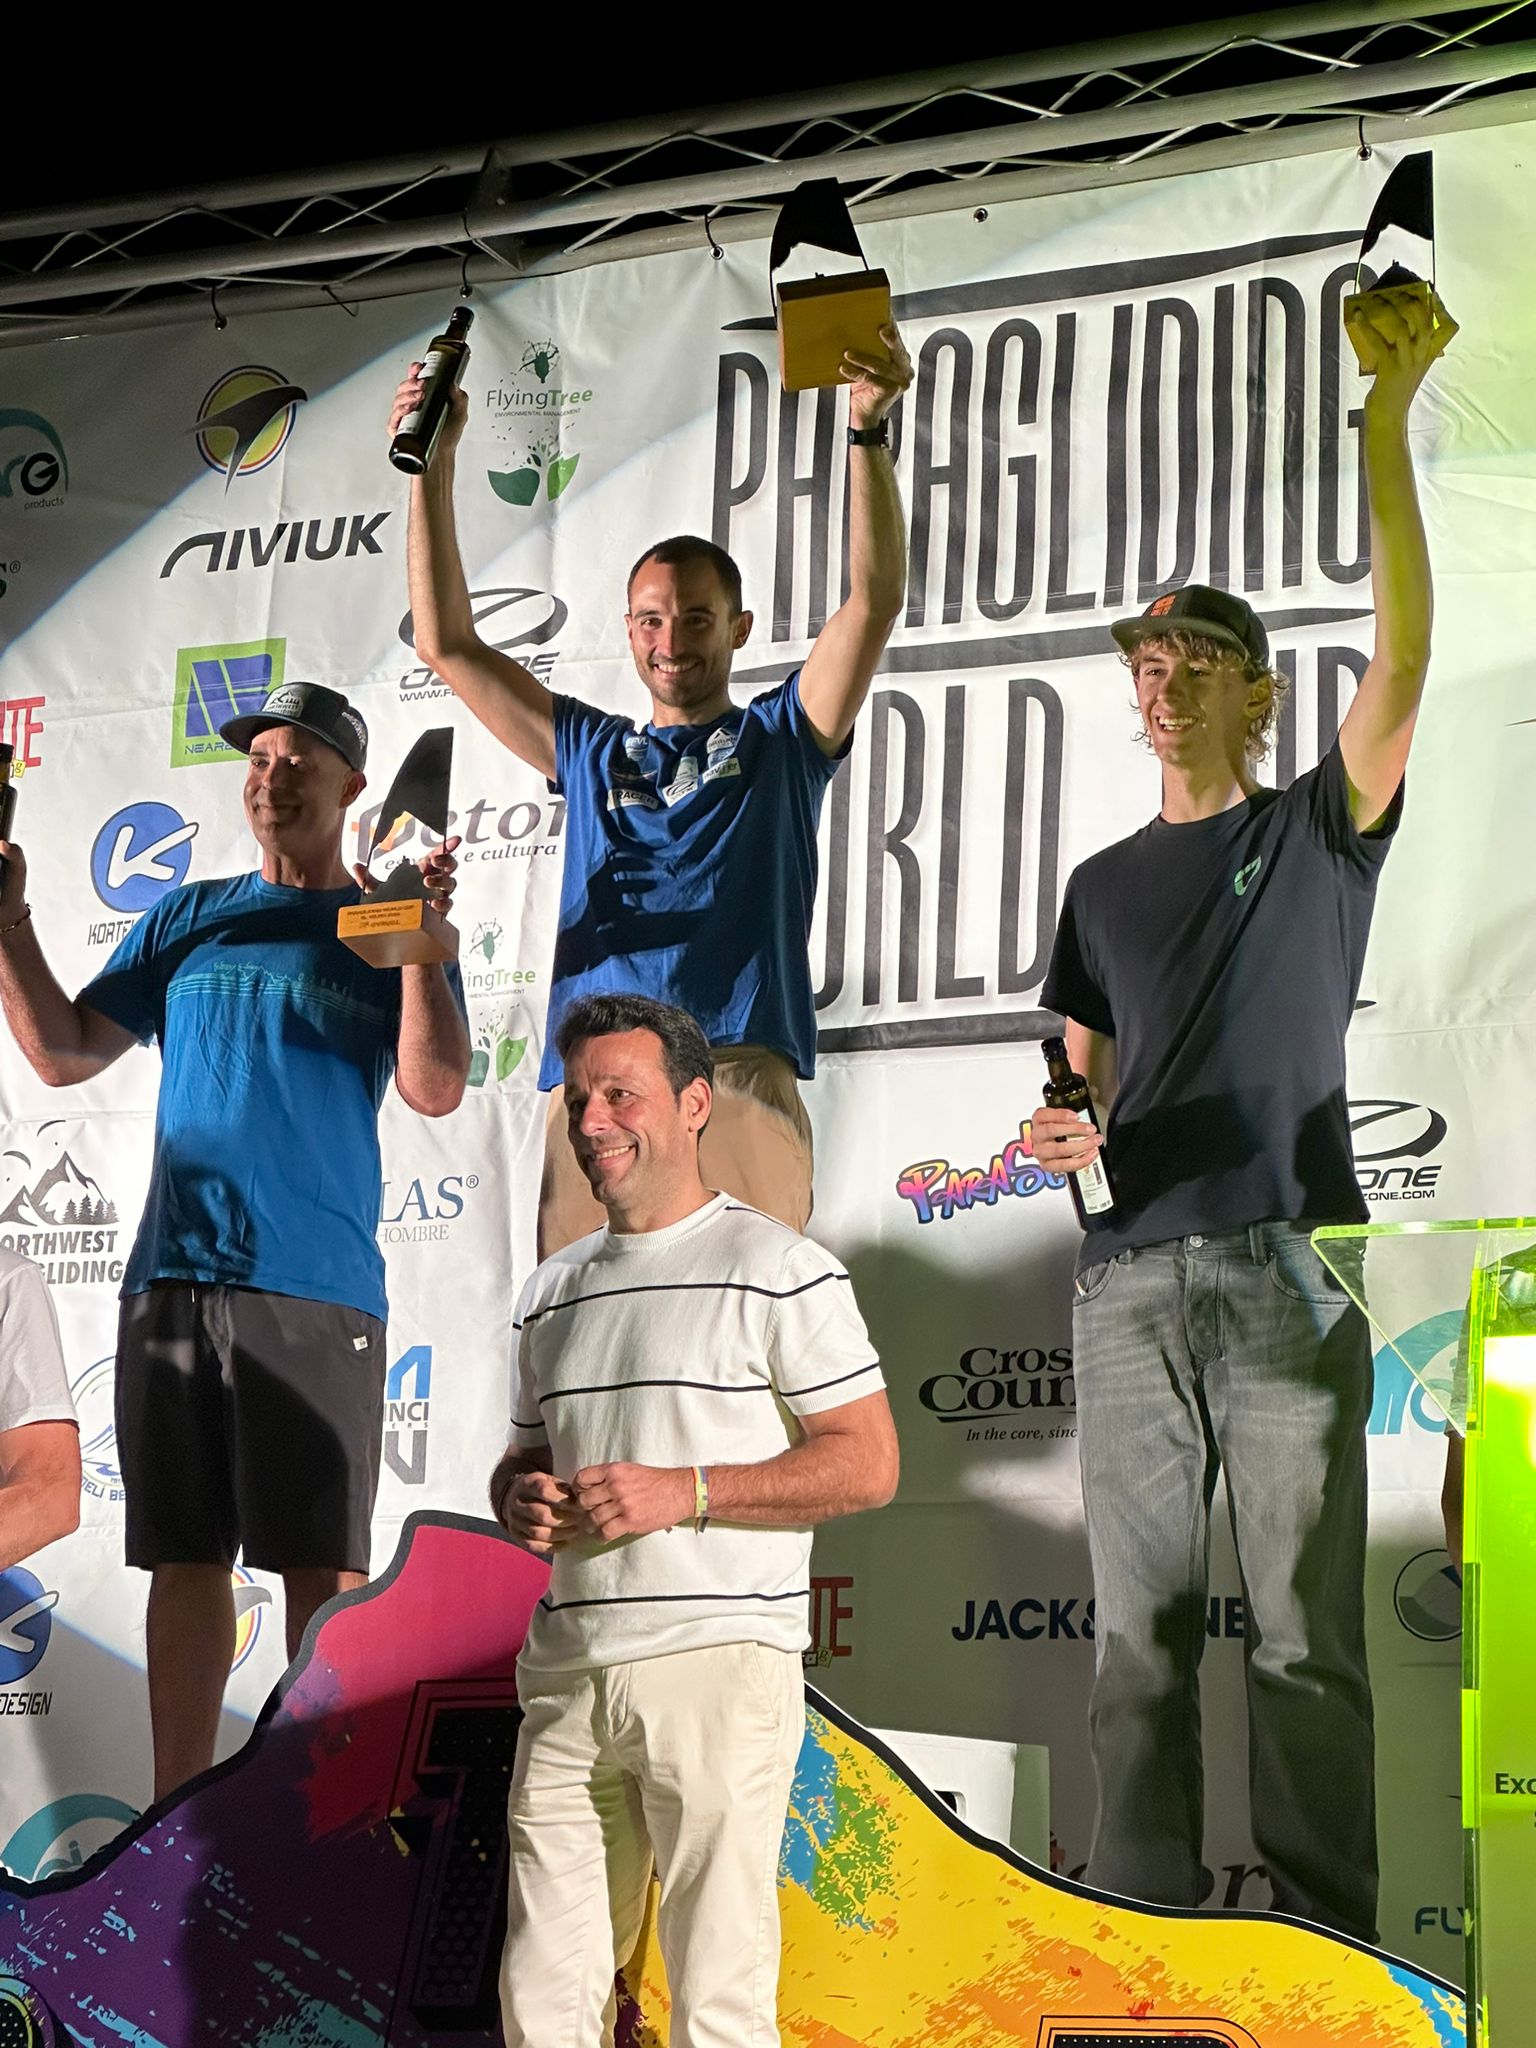 A Sky-High Achievement: Celebrating Third Place at the Paragliding World Cup in El Yelmo, Spain